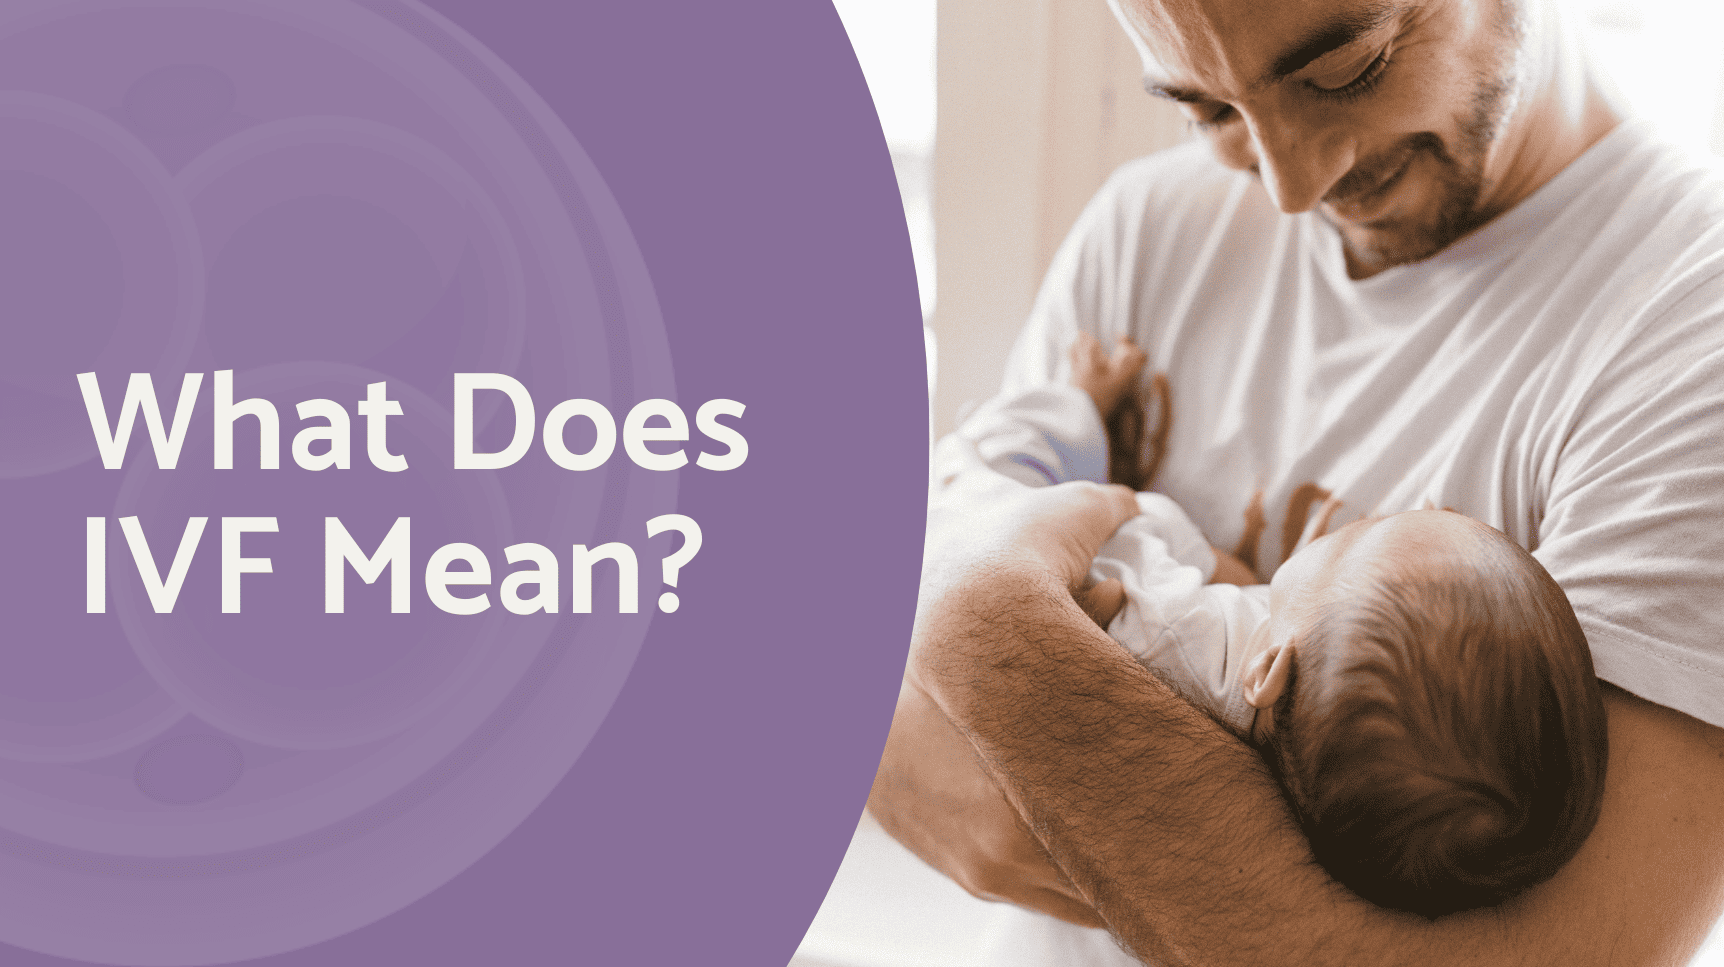 What Does IVF Mean?